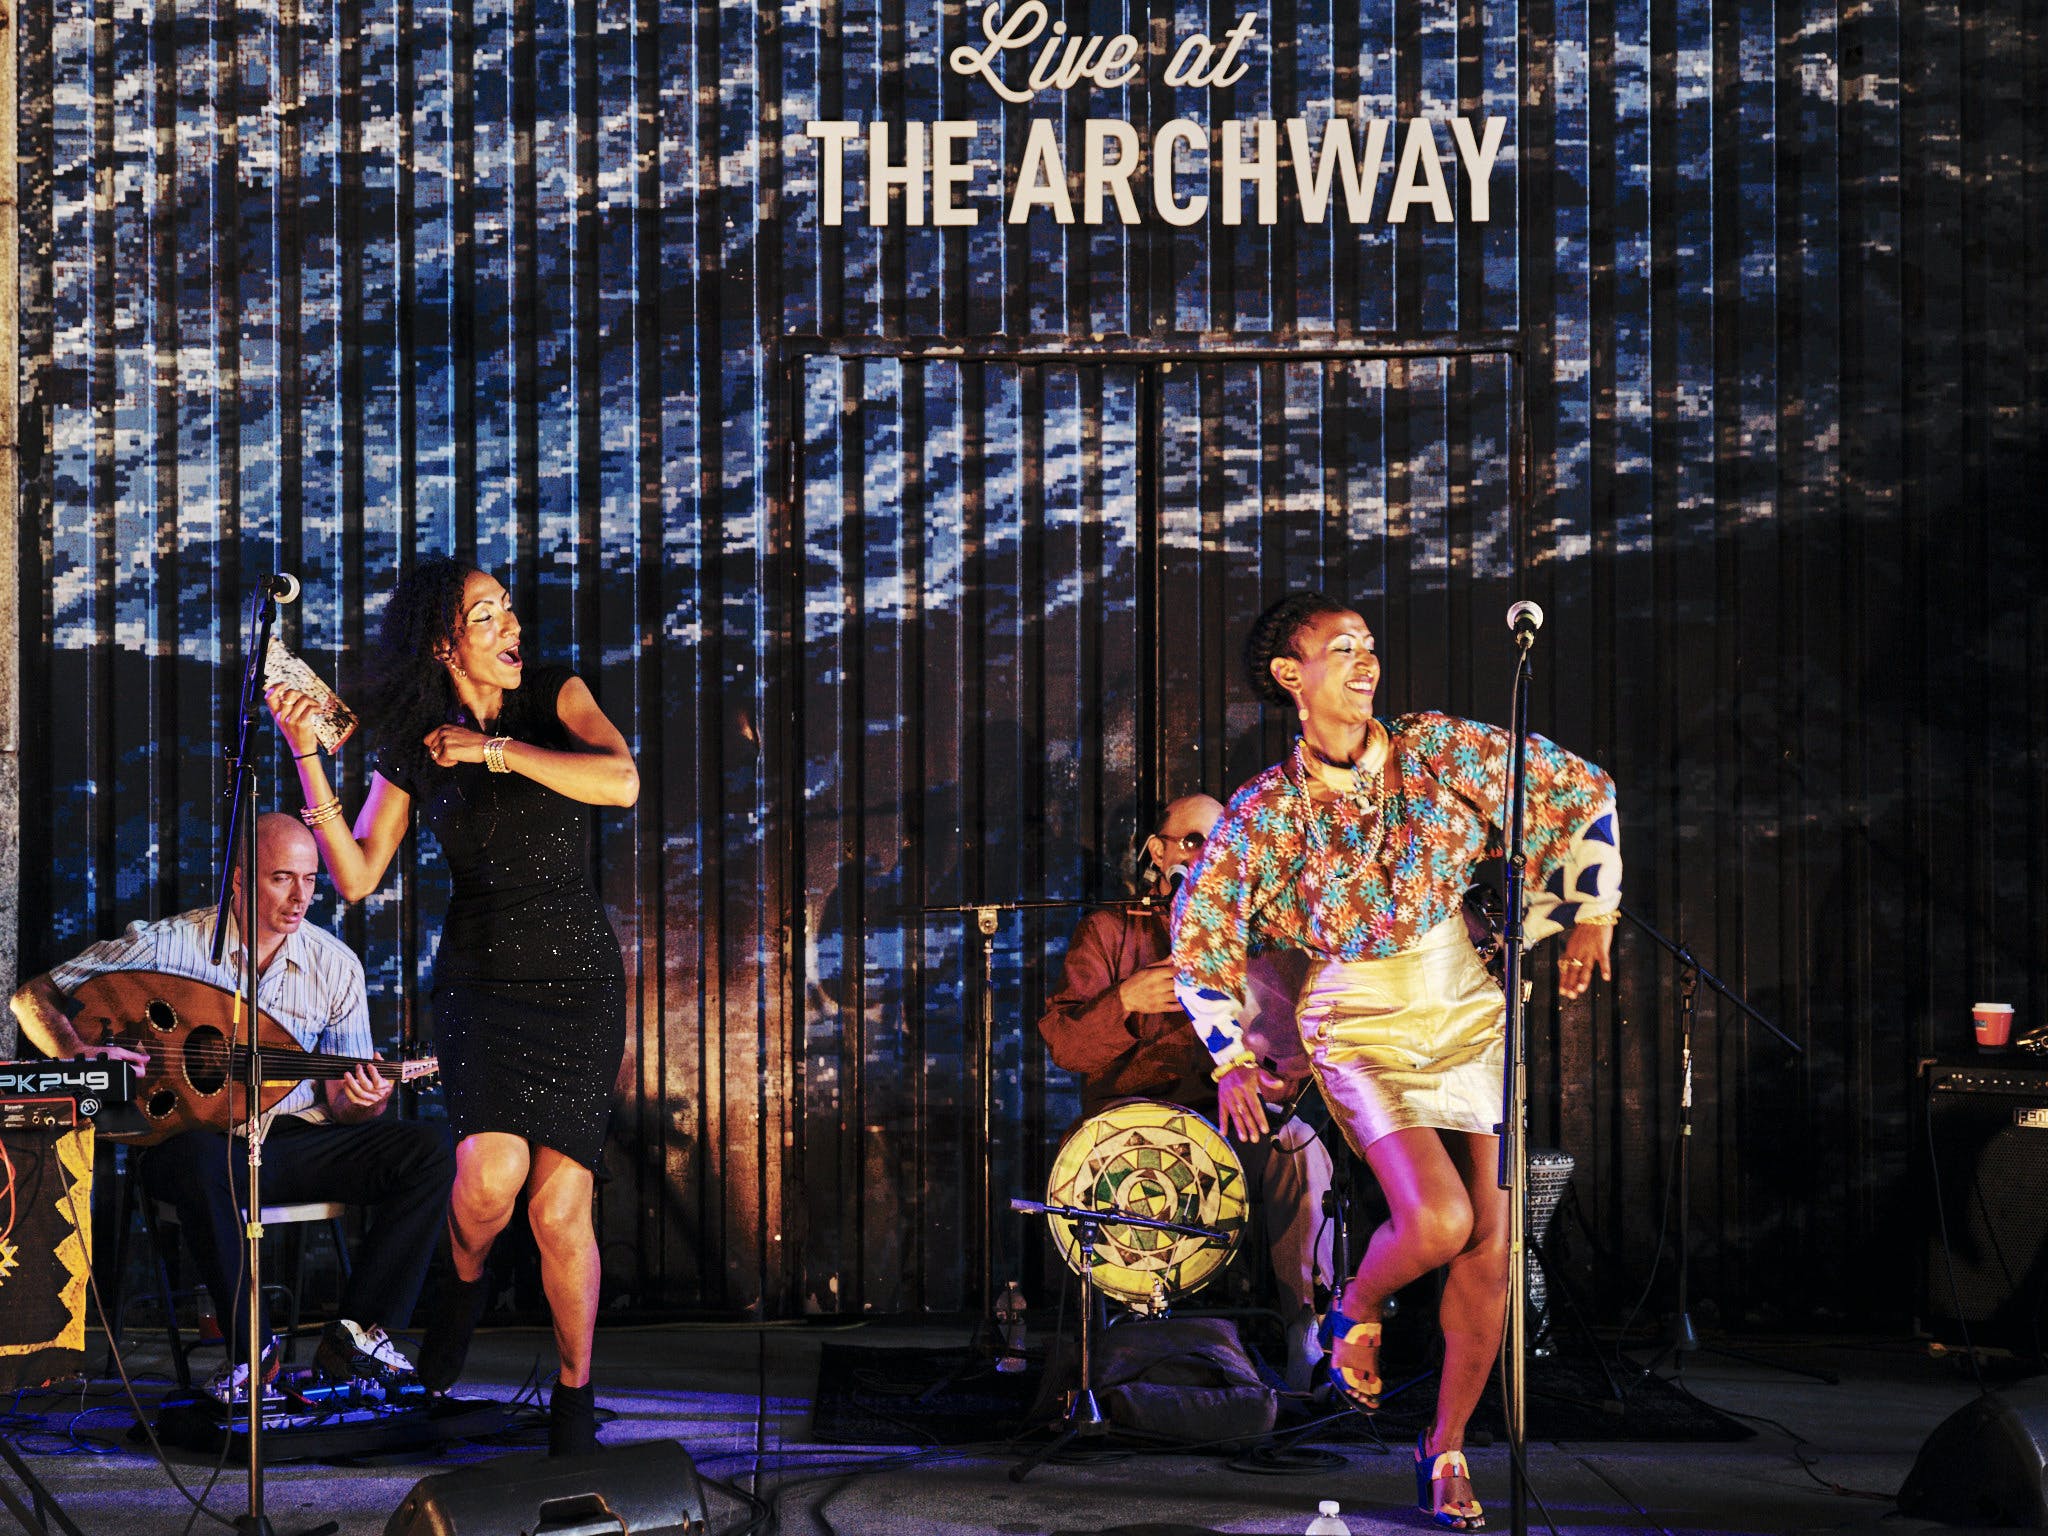 NYC Brooklyn DUMBO Improvement District - Small Business & Community - Community - NYC DUMBO Events at the ARCHWAY - 2019 LIVE at the Archway Alsarah and the Nubatones